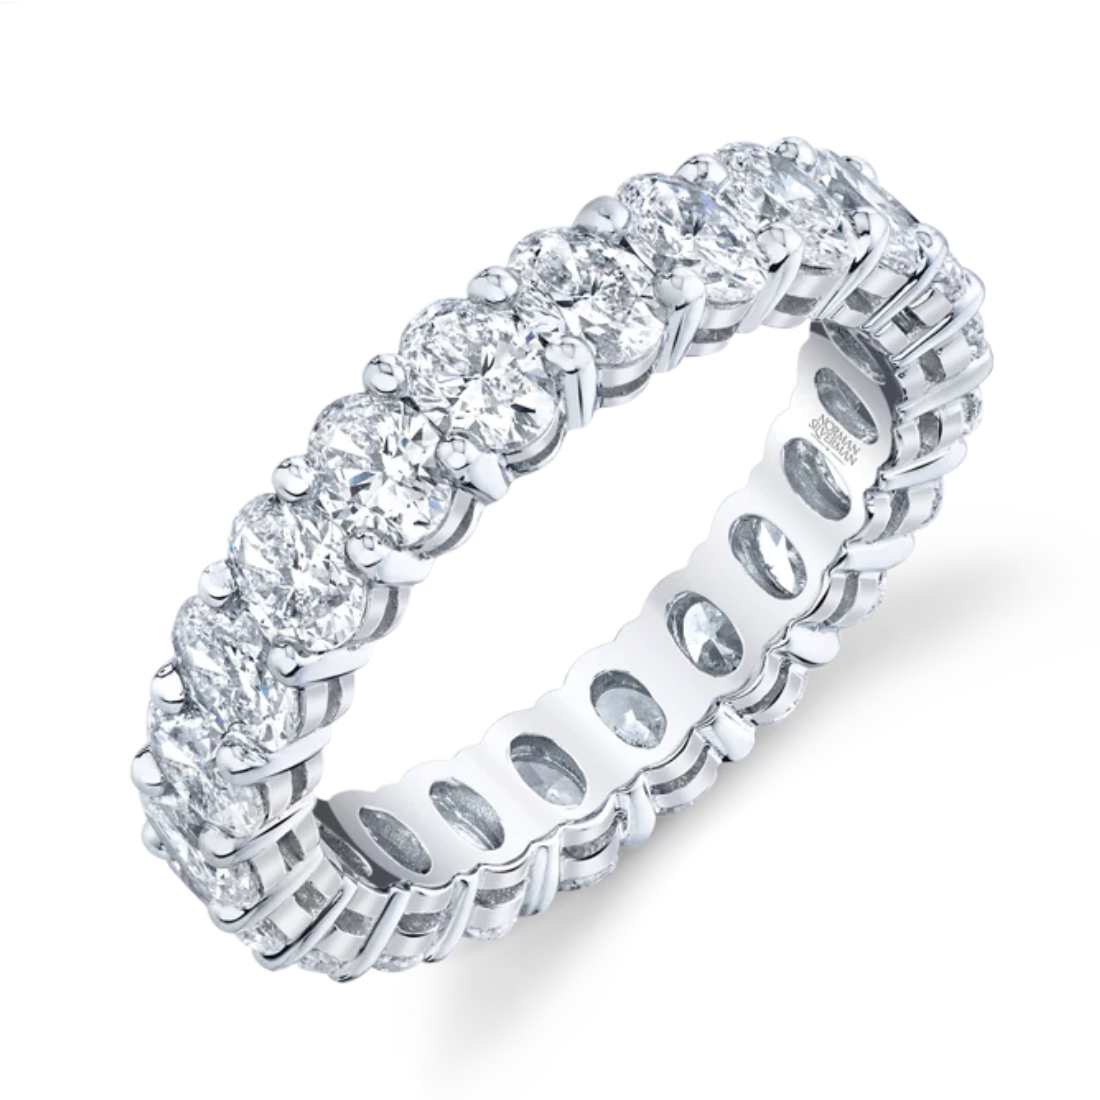 Norman Silverman Platinum Eternity band with 21 Oval Diamonds